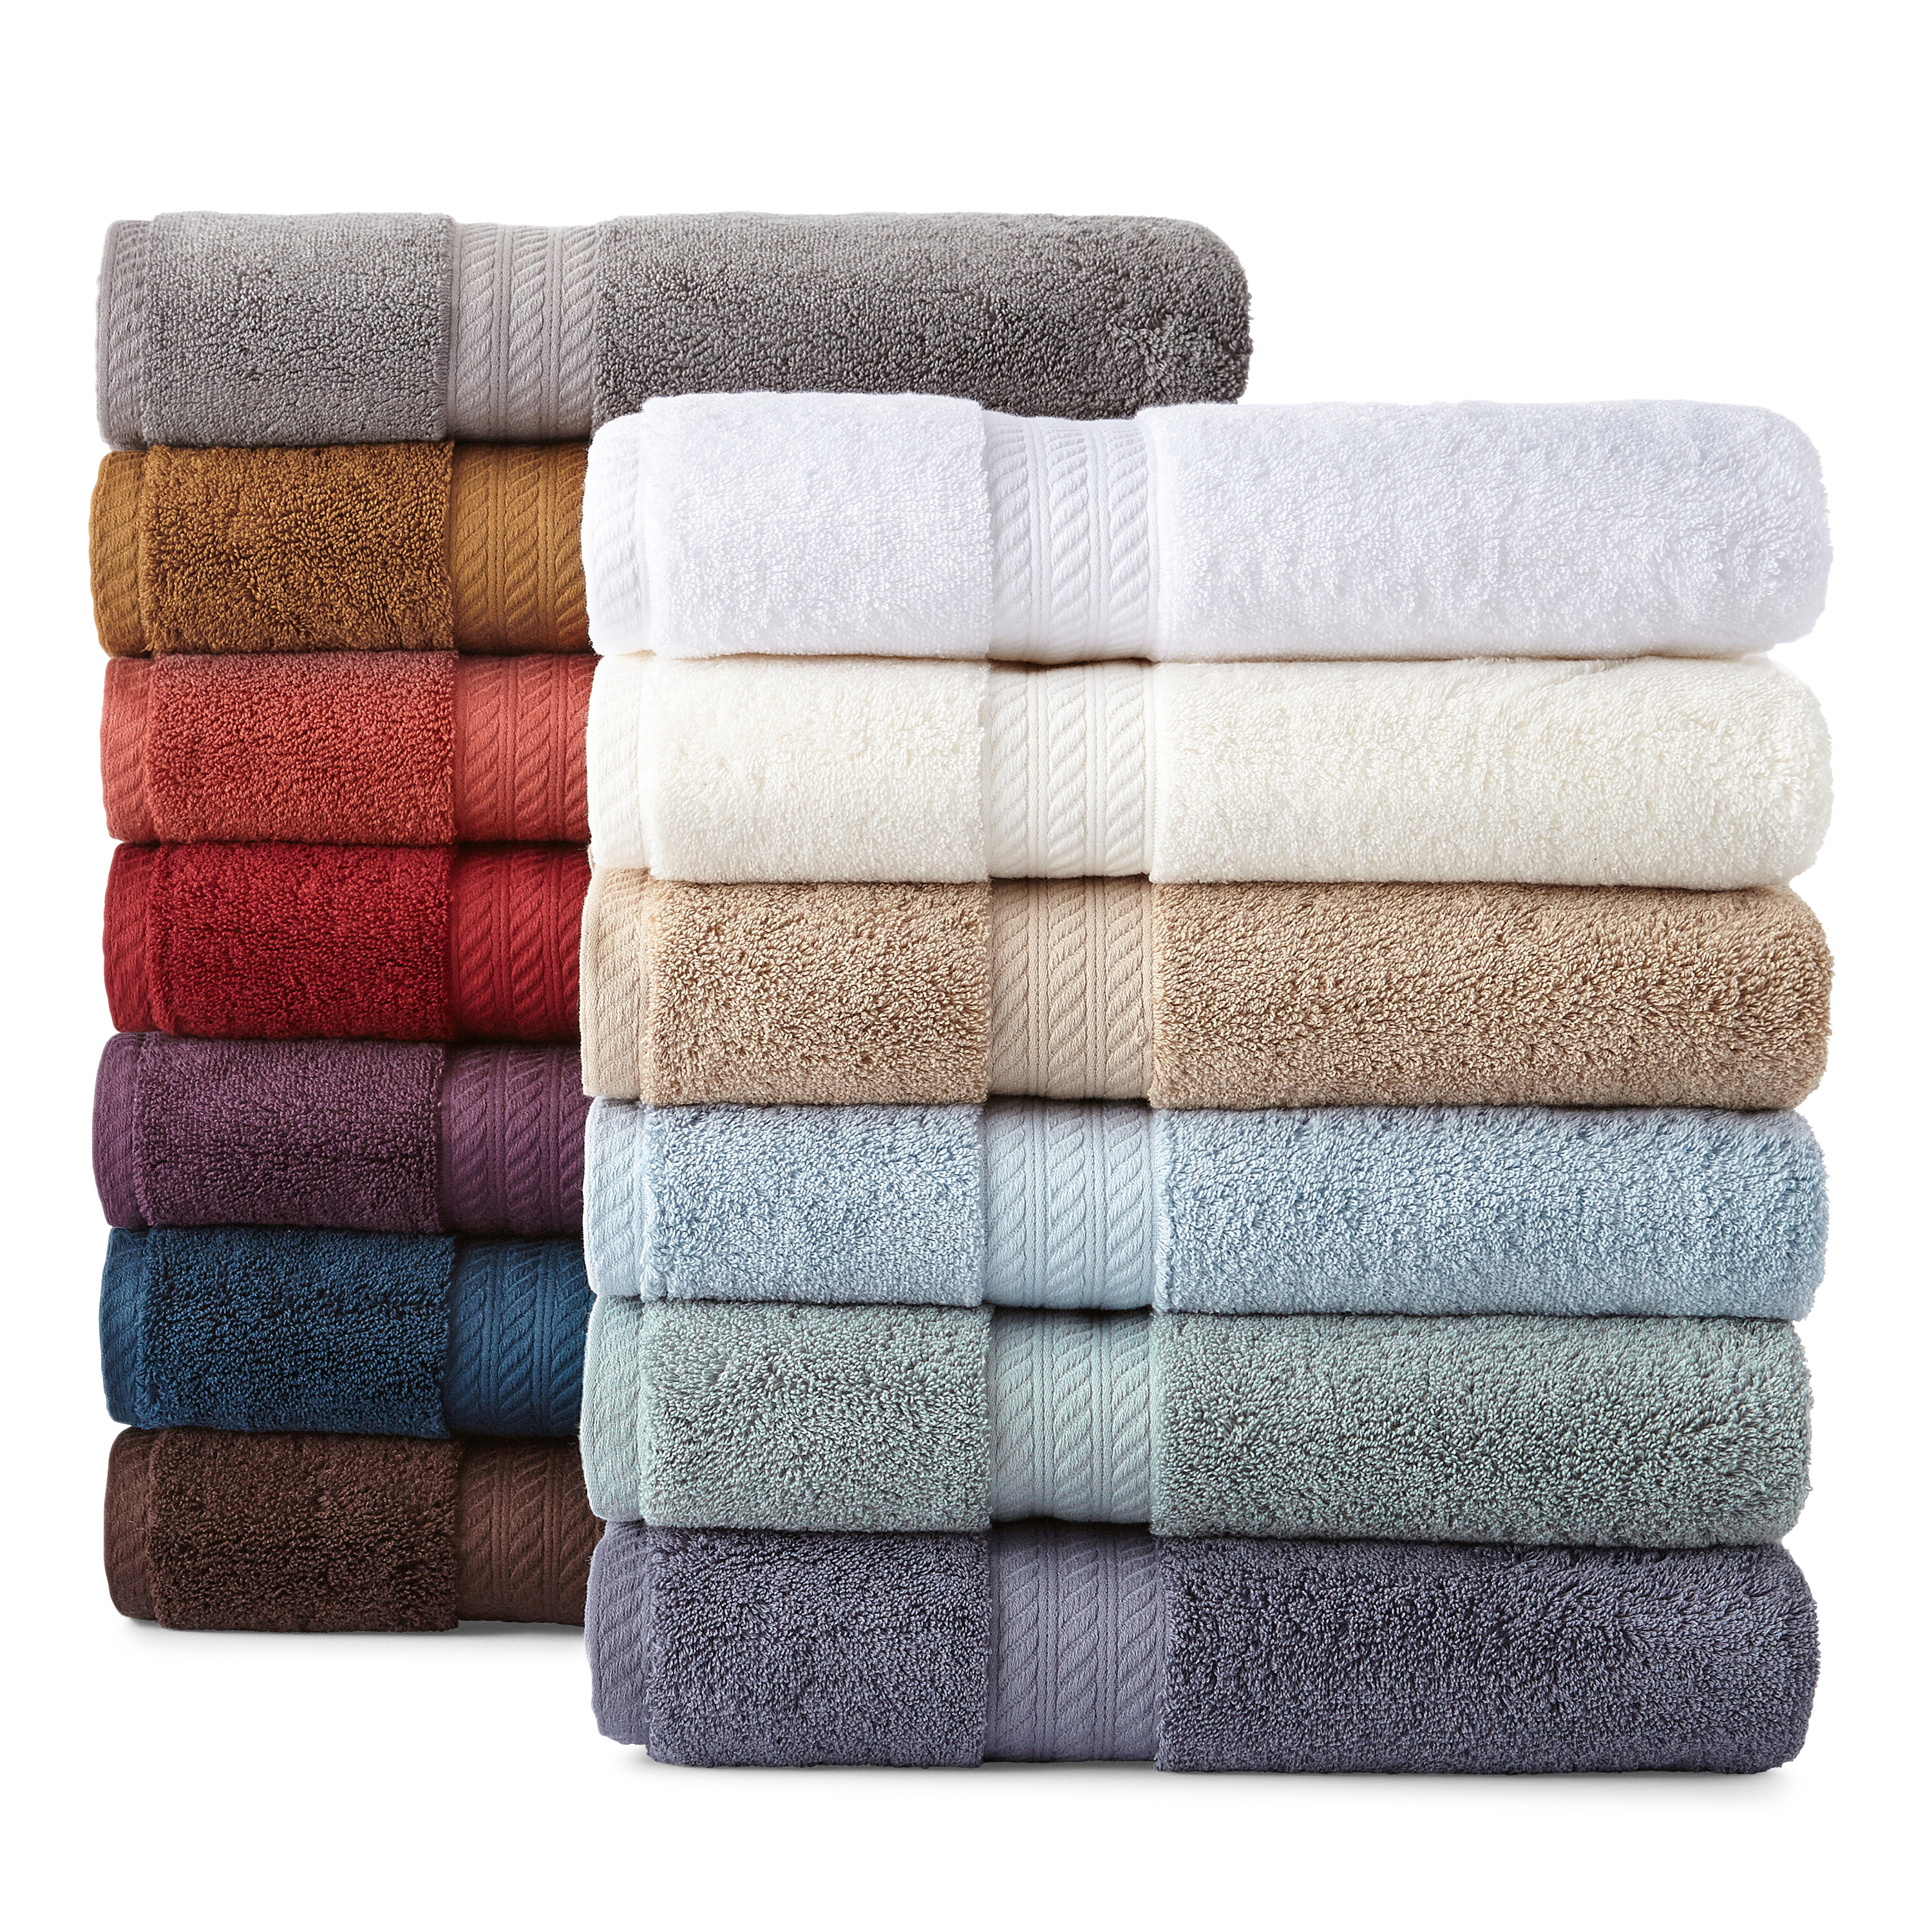 Epr Retail News Jcpenney To Offer Refund For Royal Velvet Egyptian Cotton Towels And Damask Stripe Comforter Set